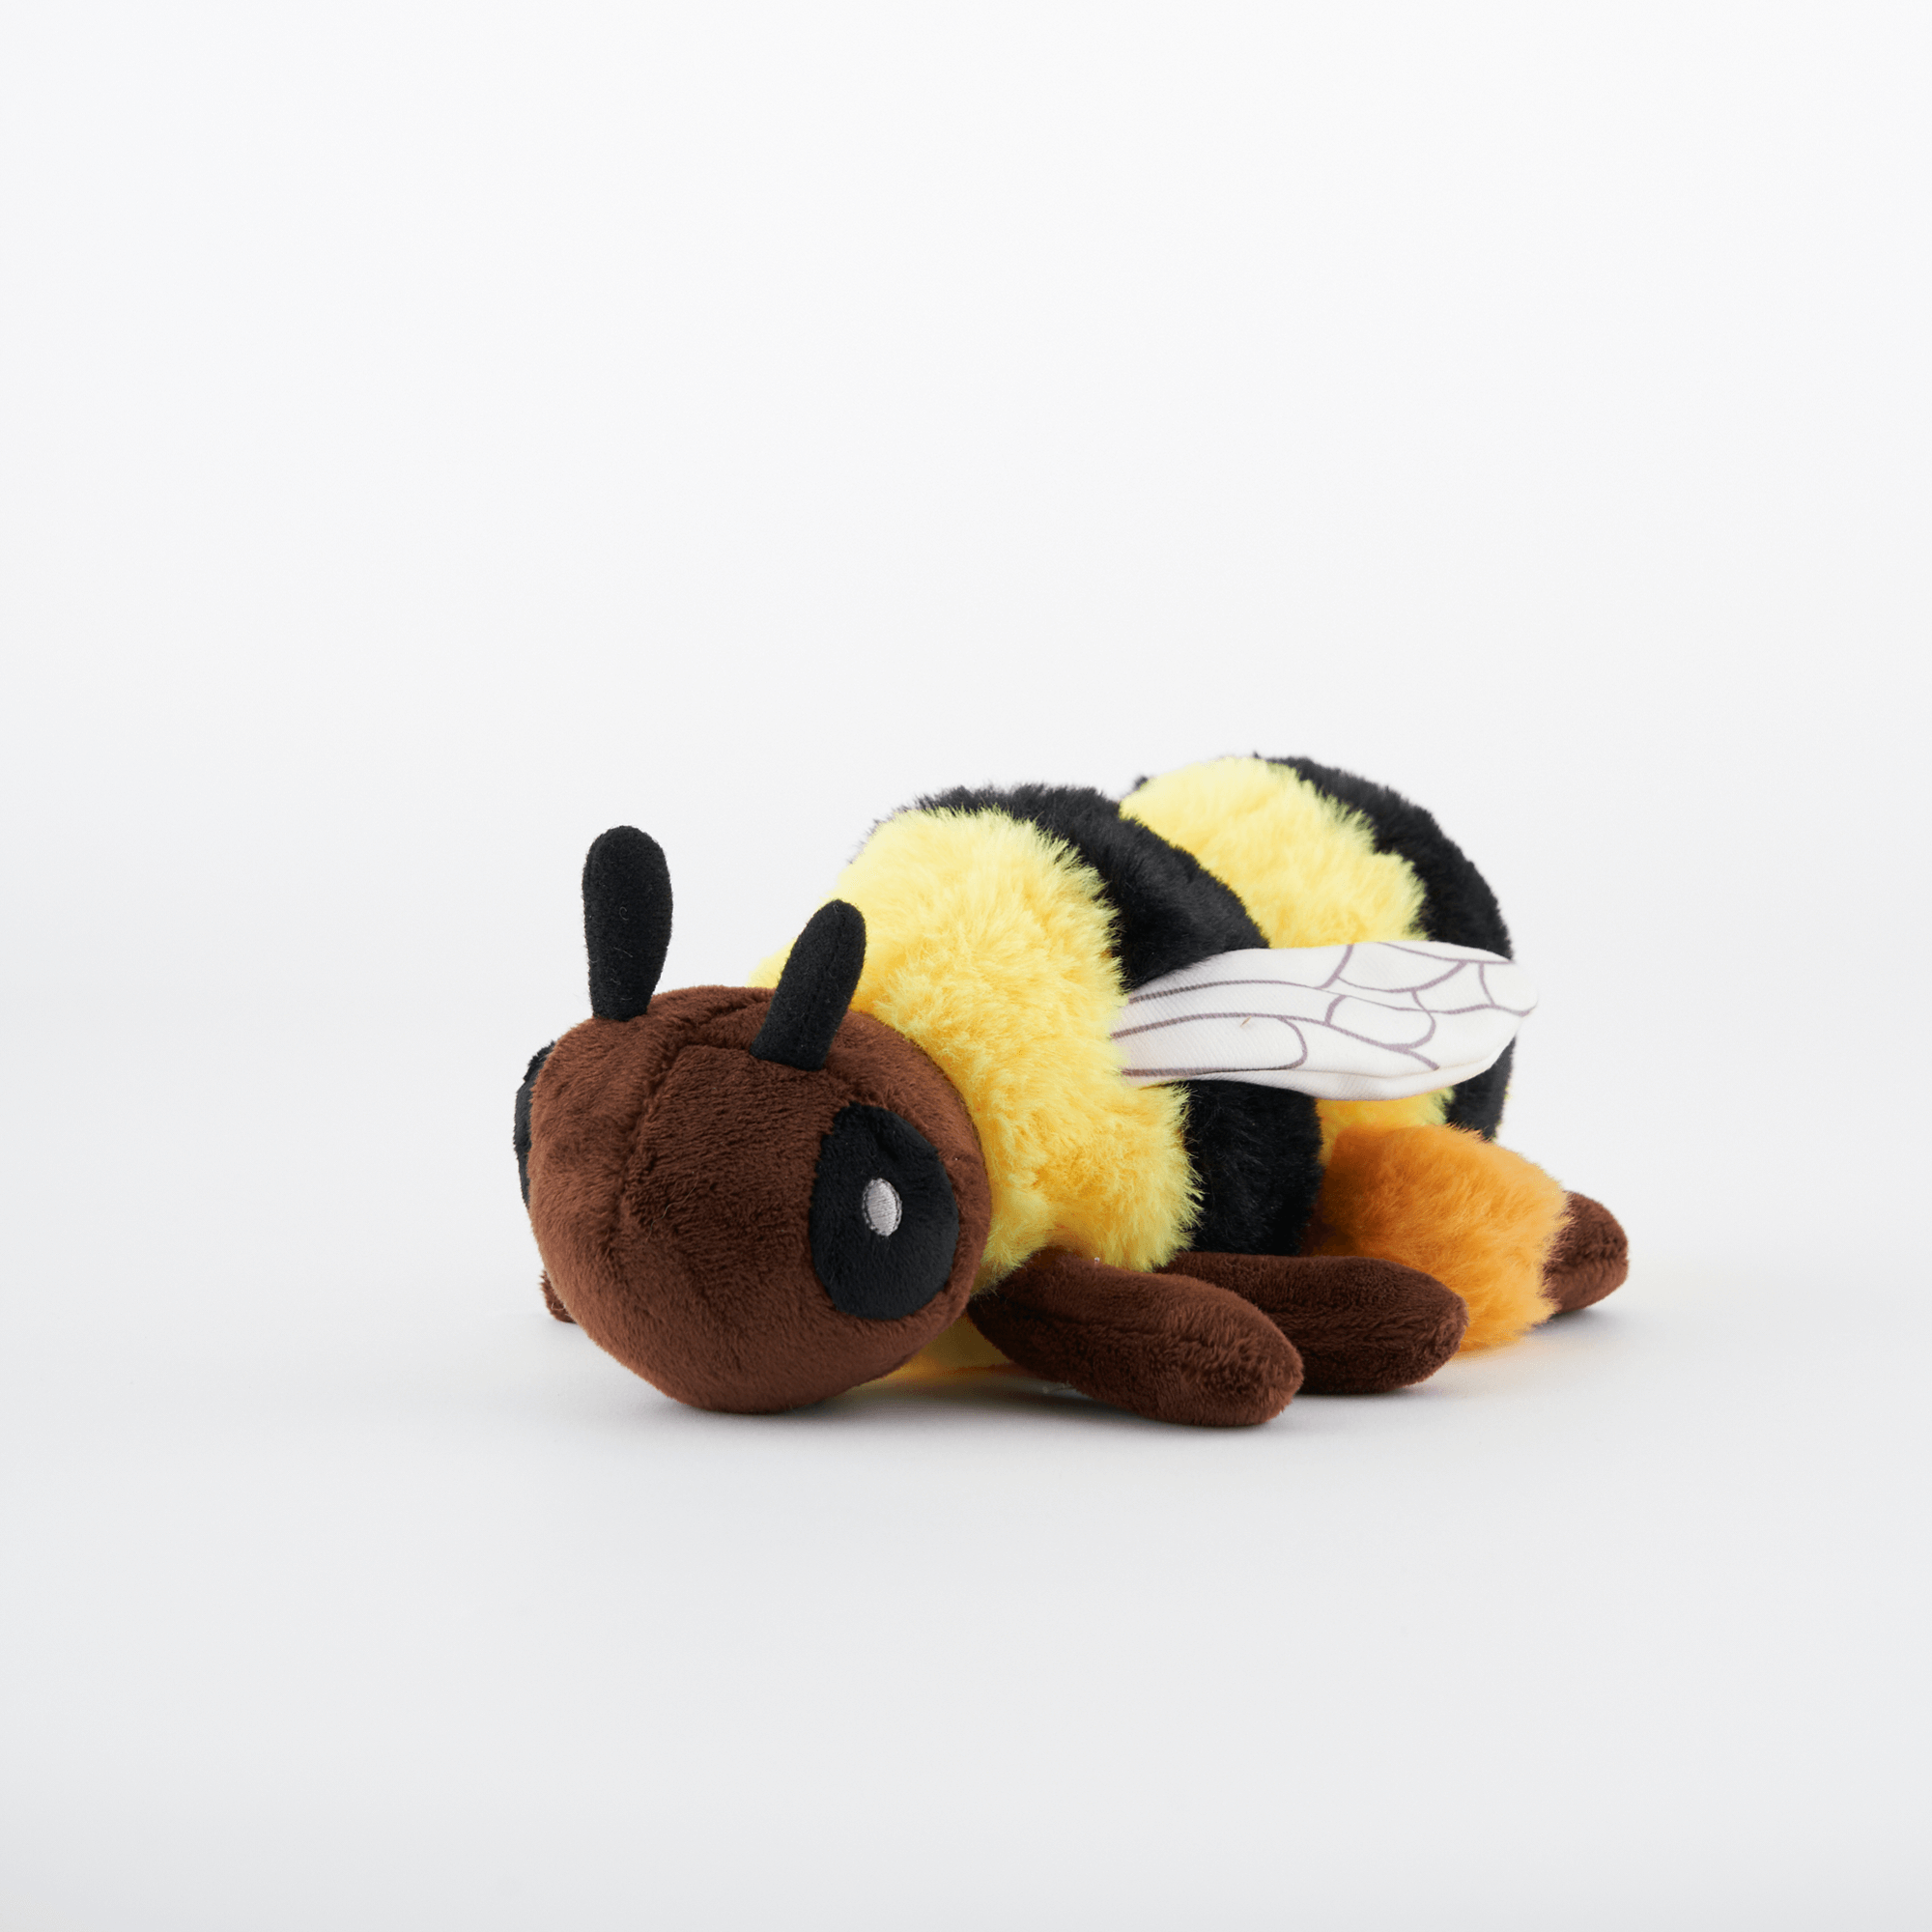 Adopt a Bumblebee  Symbolic Adoptions from WWF